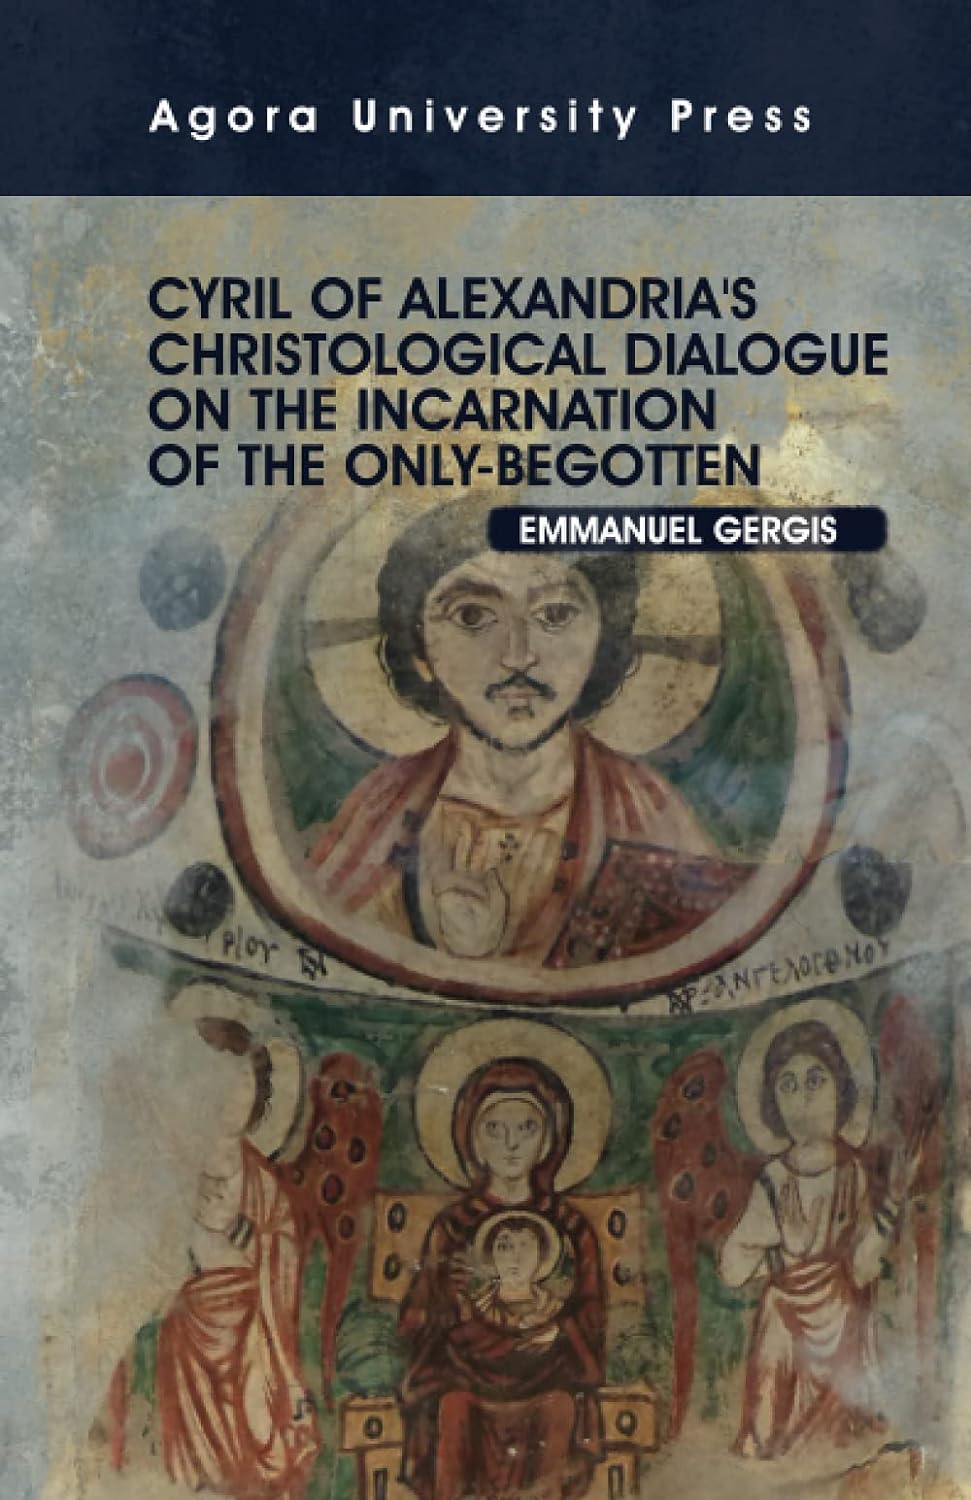 Cyril of Alexandria's Christological Dialogue on the Incarnation of the Only-Begotten